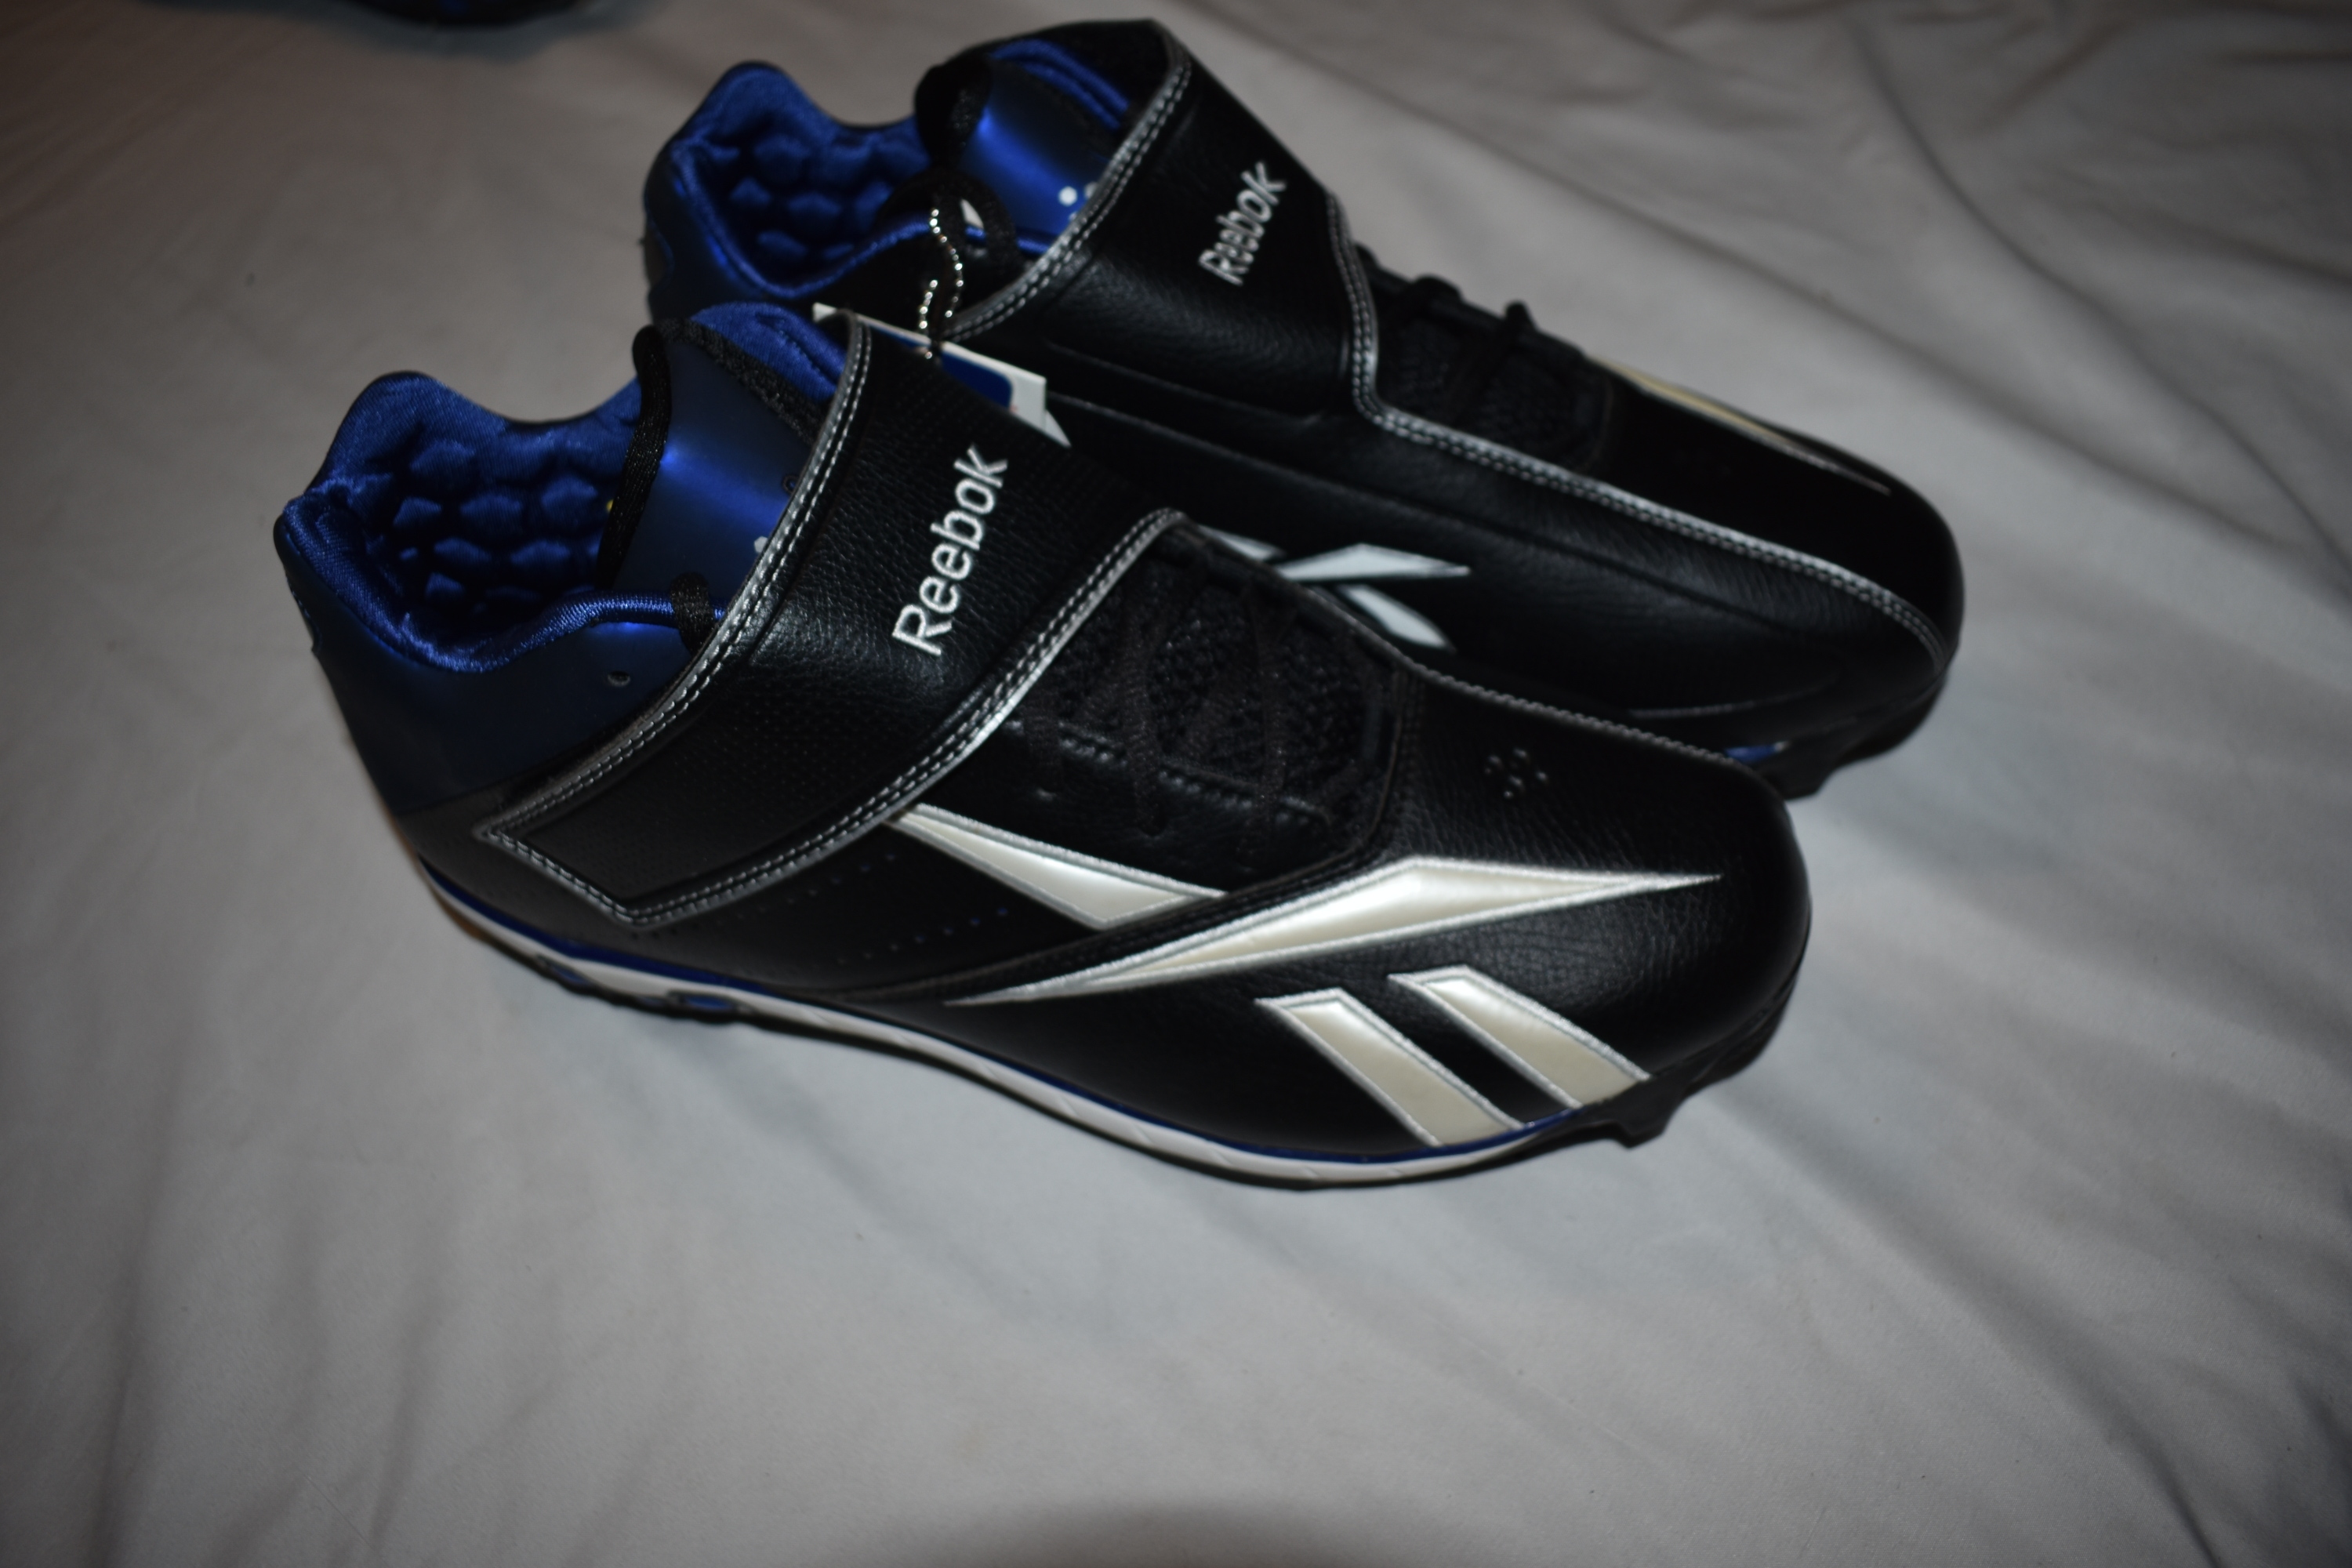 NEW - Reebok MLB Baseball Metal Cleats w/ Ortholite/Play Dry Features, Black, Size 13